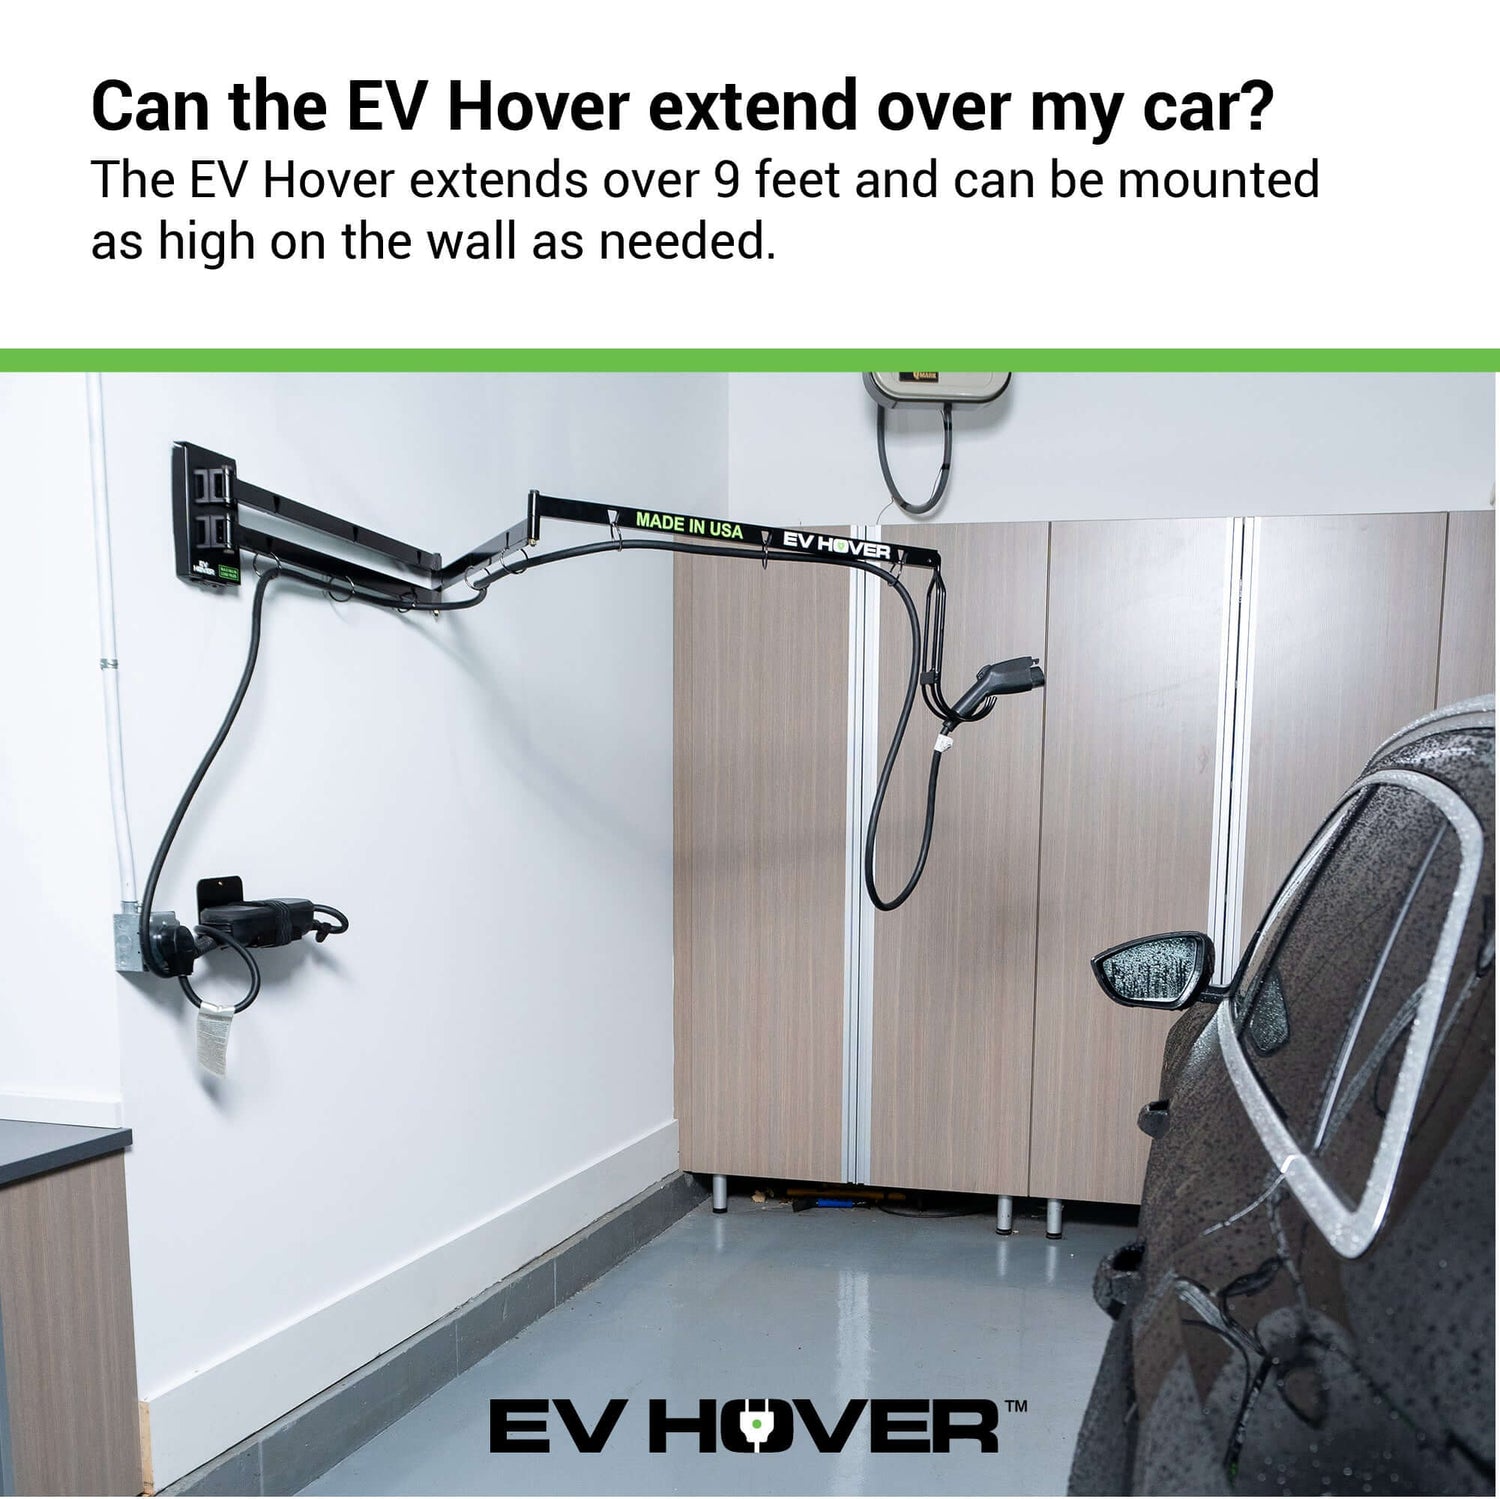 EV Hover extends over 9 feet and can be mounted as high on the wall as needed.